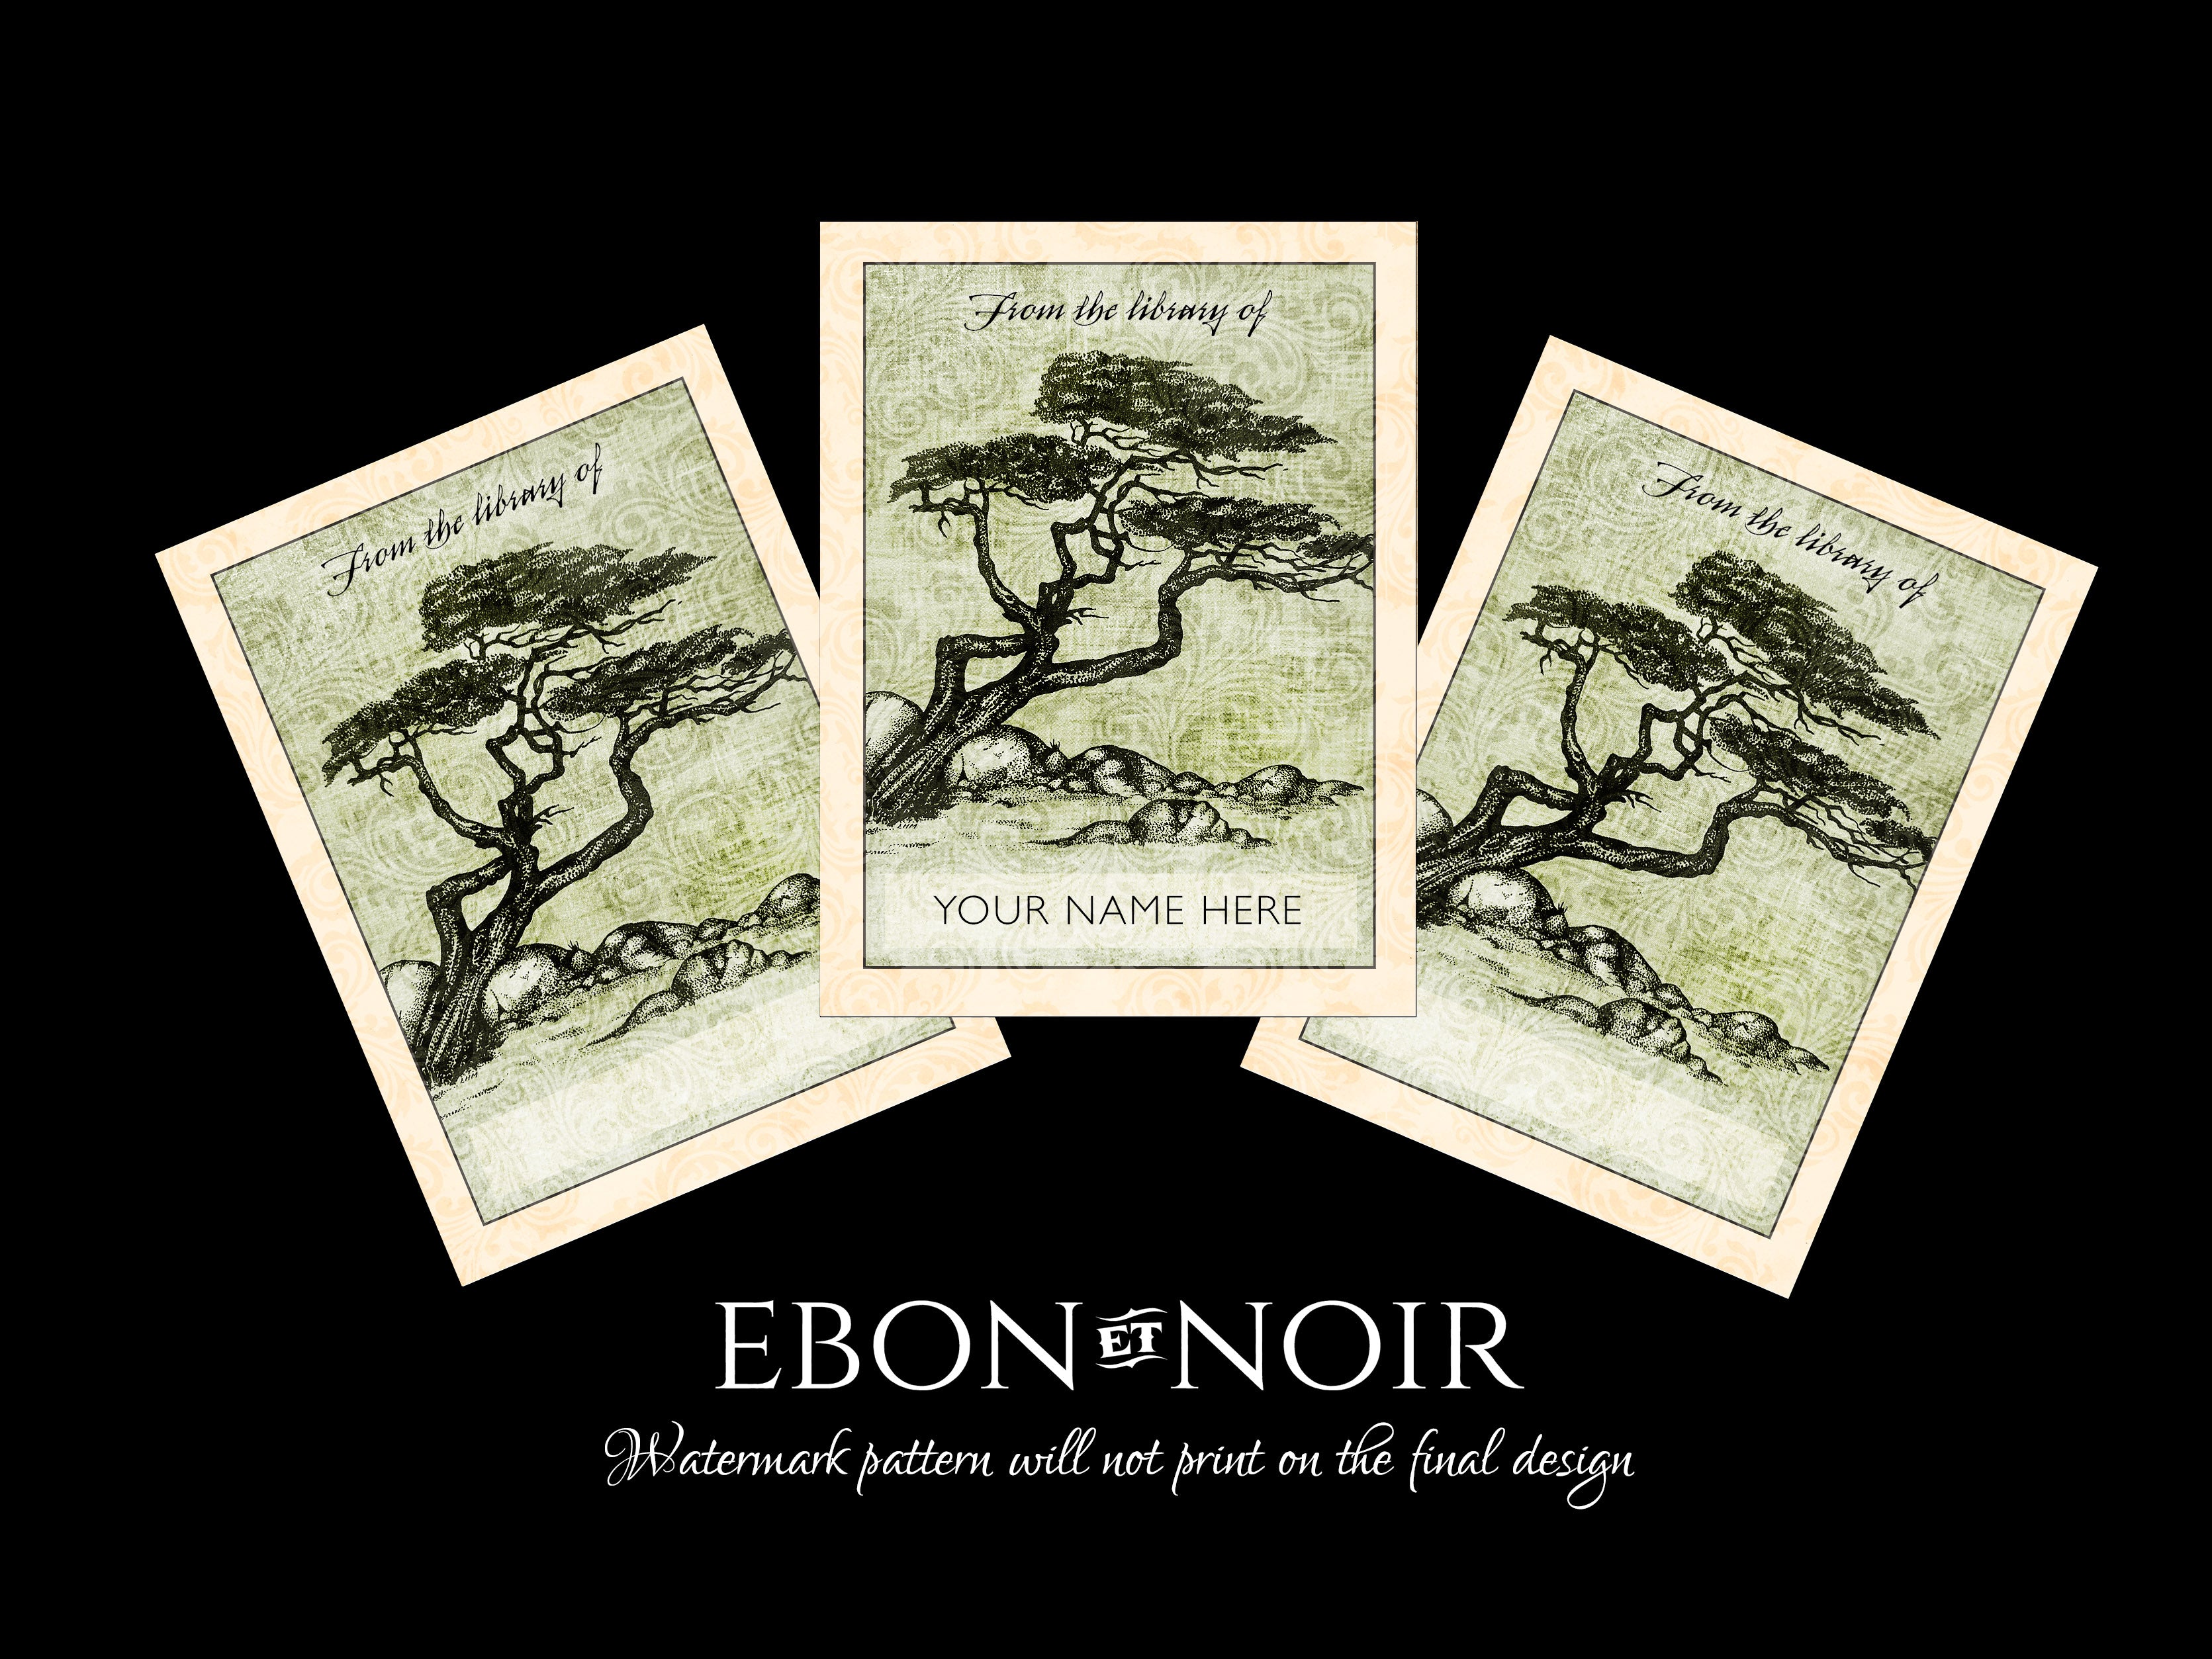 Japanese Black Pine (Pinus thunbergii), Personalized Ex-Libris Bookplates, Crafted on Traditional Gummed Paper, 3in x 4in, Set of 30